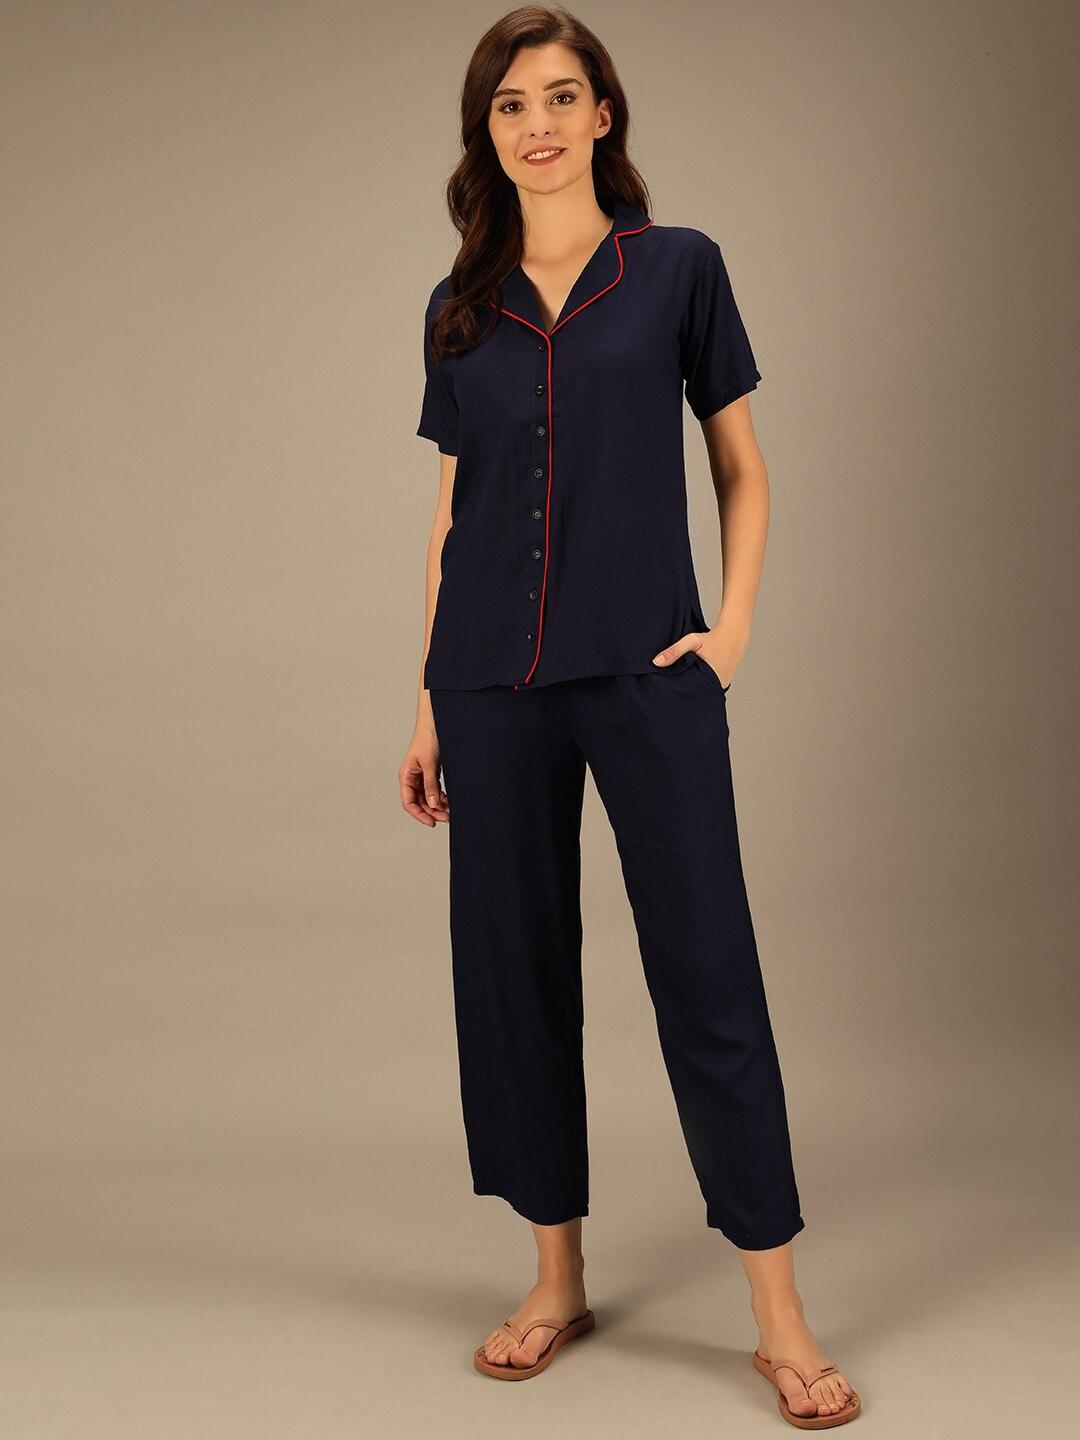 baesd-solid-cotton-night-suit-baesd